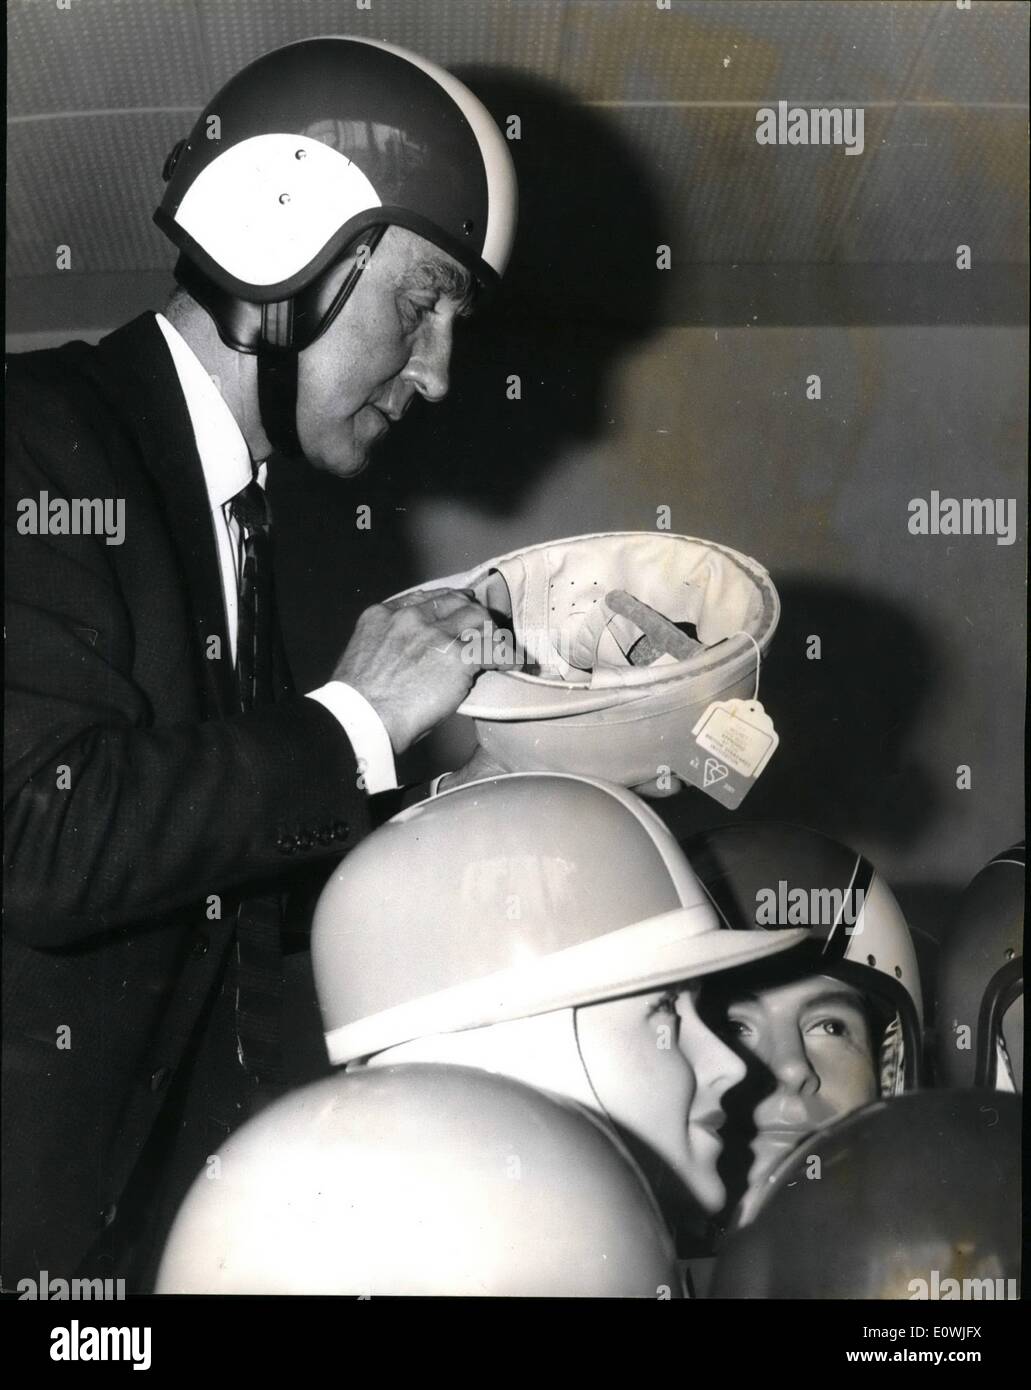 May 27, 1963 - 27-5-63 Mr. Marples launches campaign for safety helmets. Transport Minister Mr. Ernest Marples today launched a six-month campaign to encourage motor cyclist to wear safety helmets. The Minister has the power to make the wearing of safety helmets compulsory, but wants to try to persuade motor cyclists to wear them voluntarily. Photo Shows: At the press conference, Mr. Marples wearing a safety helmet, looks at some of the others that were on display. Stock Photo